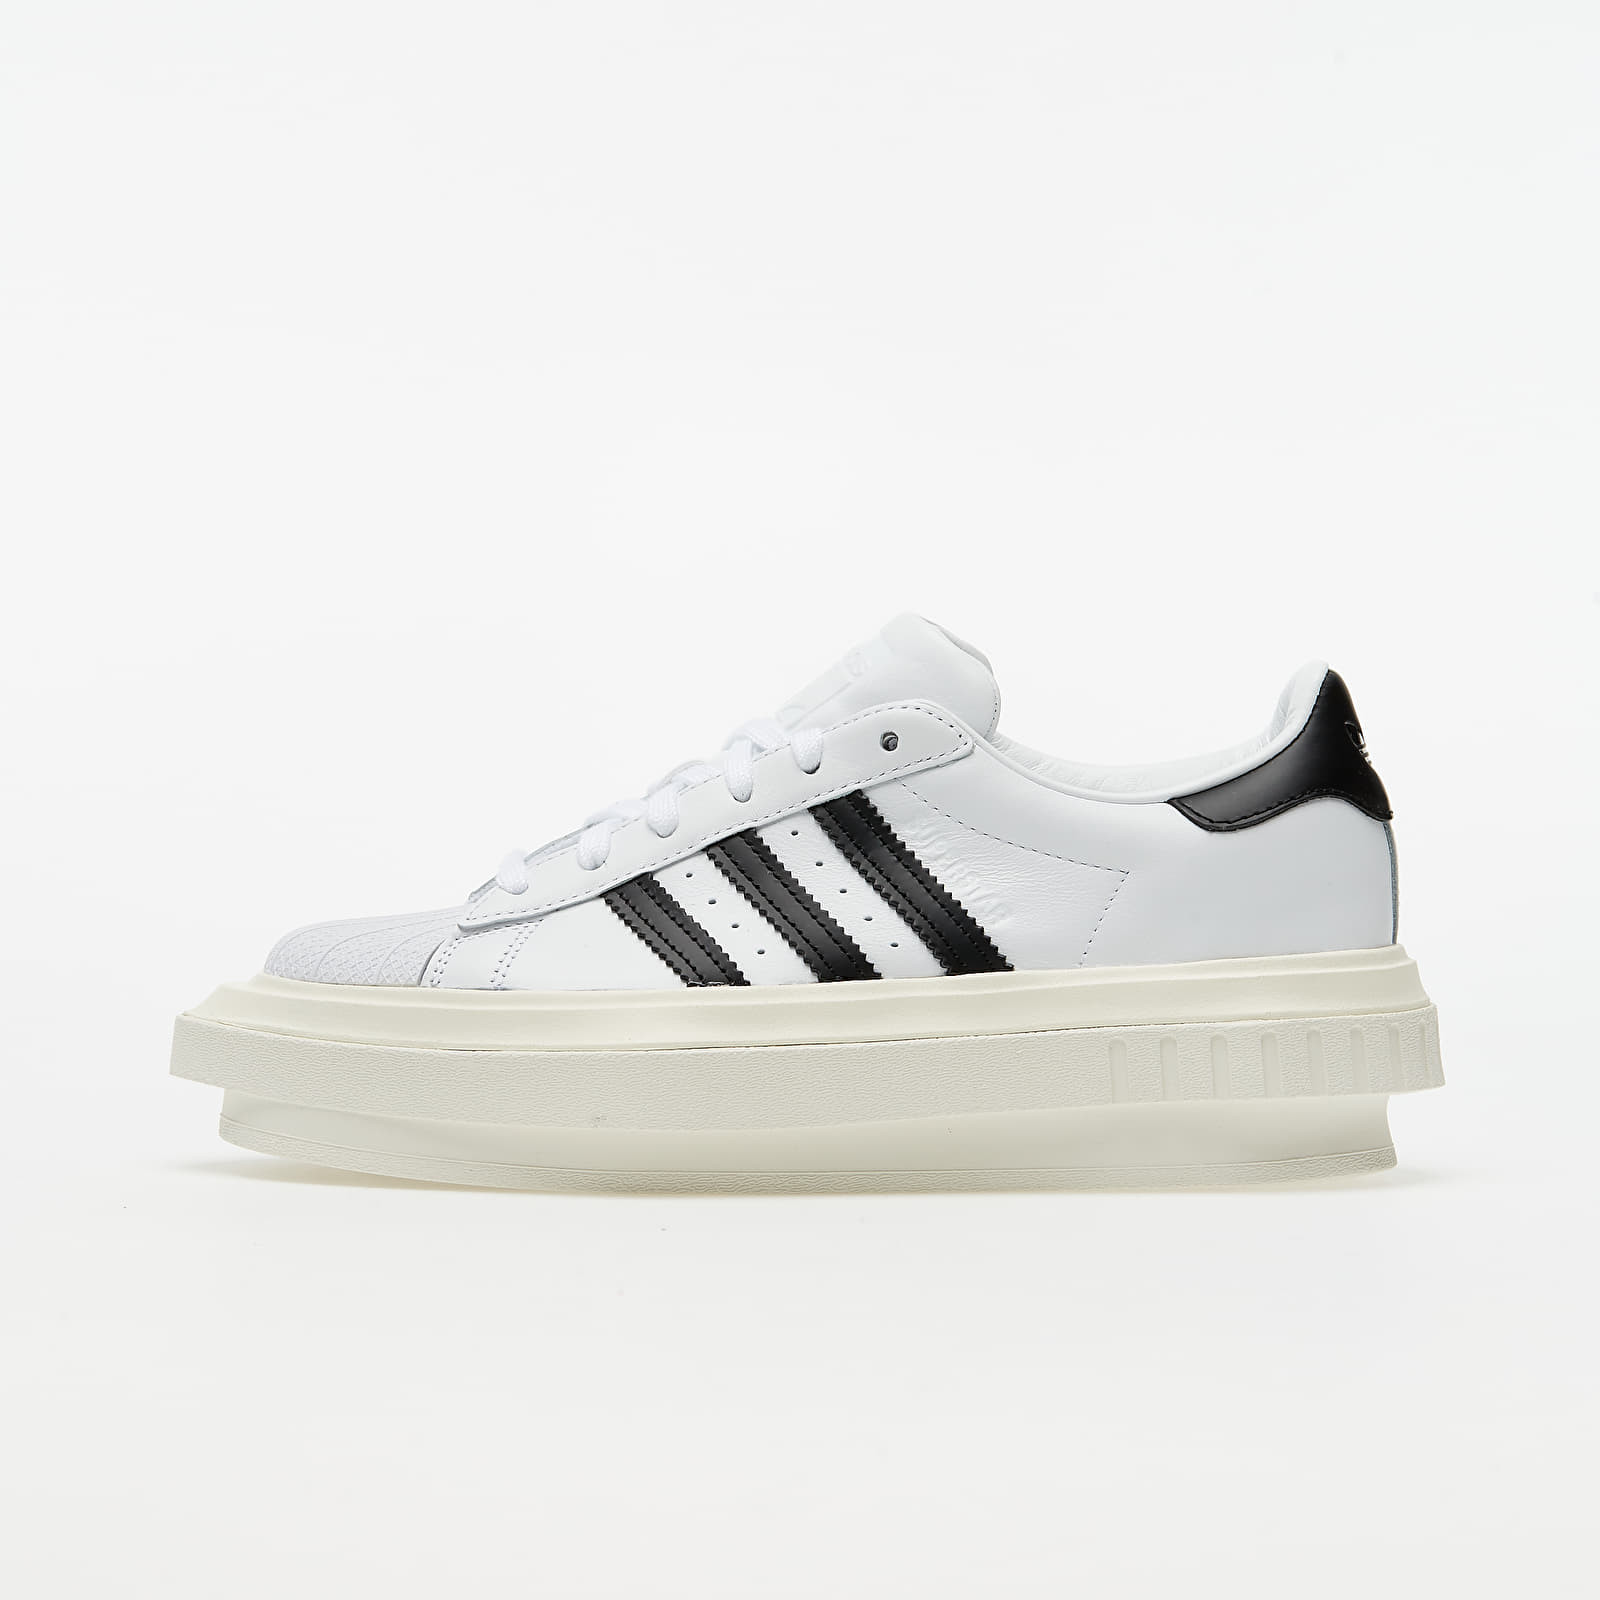 Buty damskie adidas Beyonce Superstar Ftwr White/ Core Black/ Off White